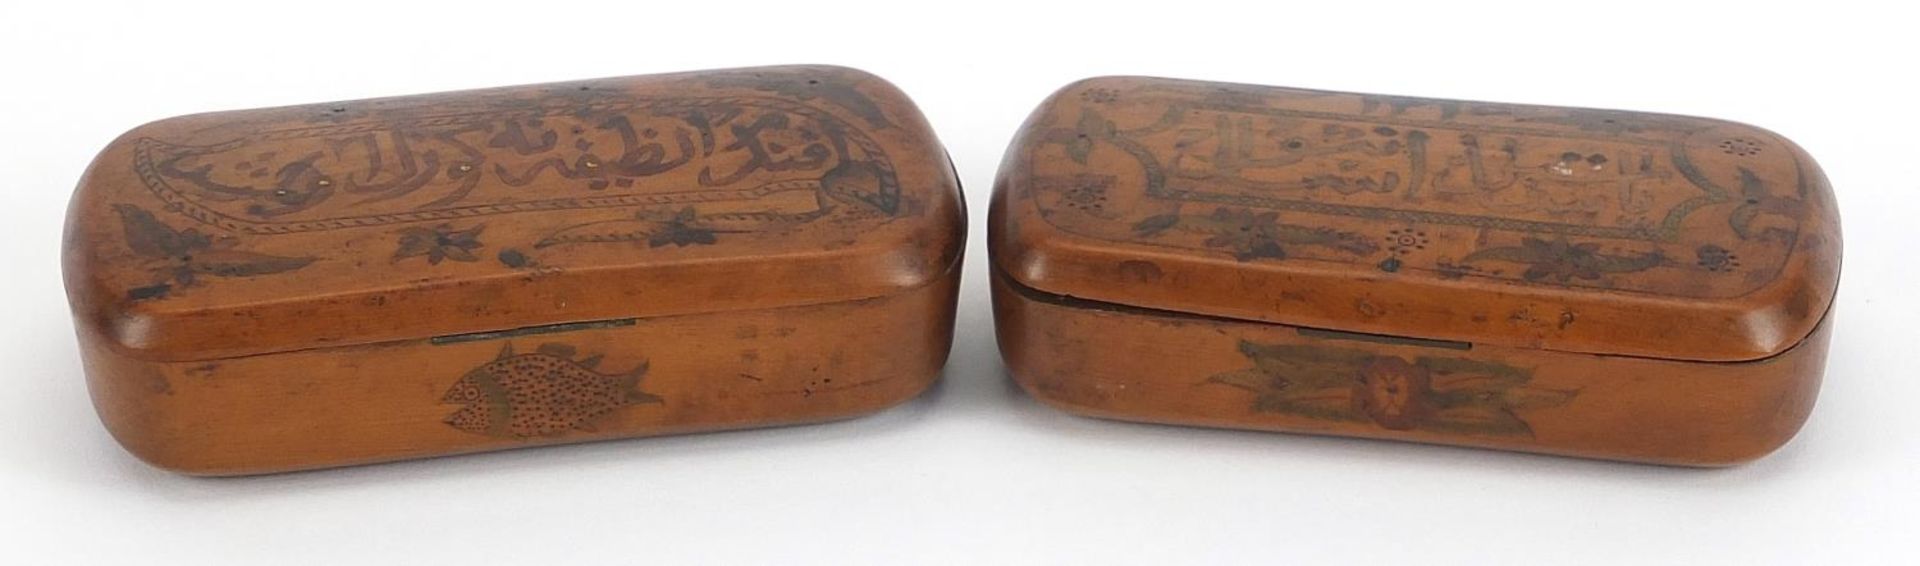 Pair of Islamic treen snuff boxes with calligraphy and flowers, each 11cm wide